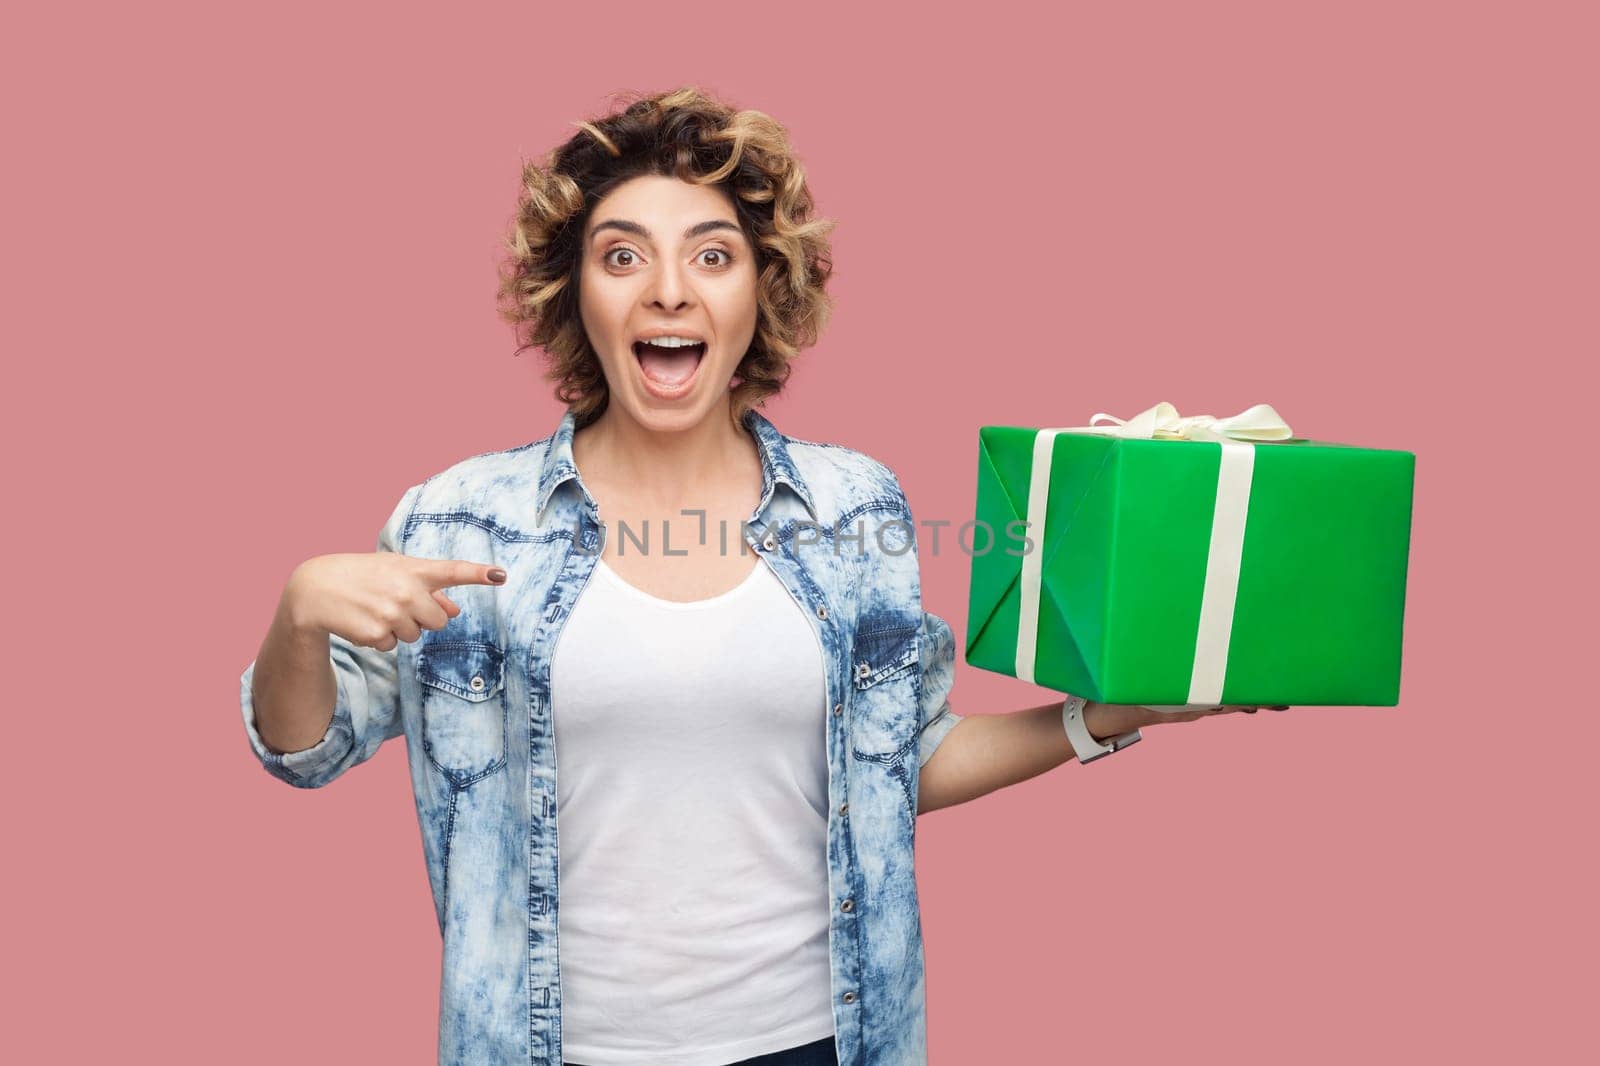 Portrait of excited happy beautiful woman with curly hairstyle wearing blue shirt pointing at green present box, being surprised, celebrating birthday. Indoor studio shot isolated on pink background.